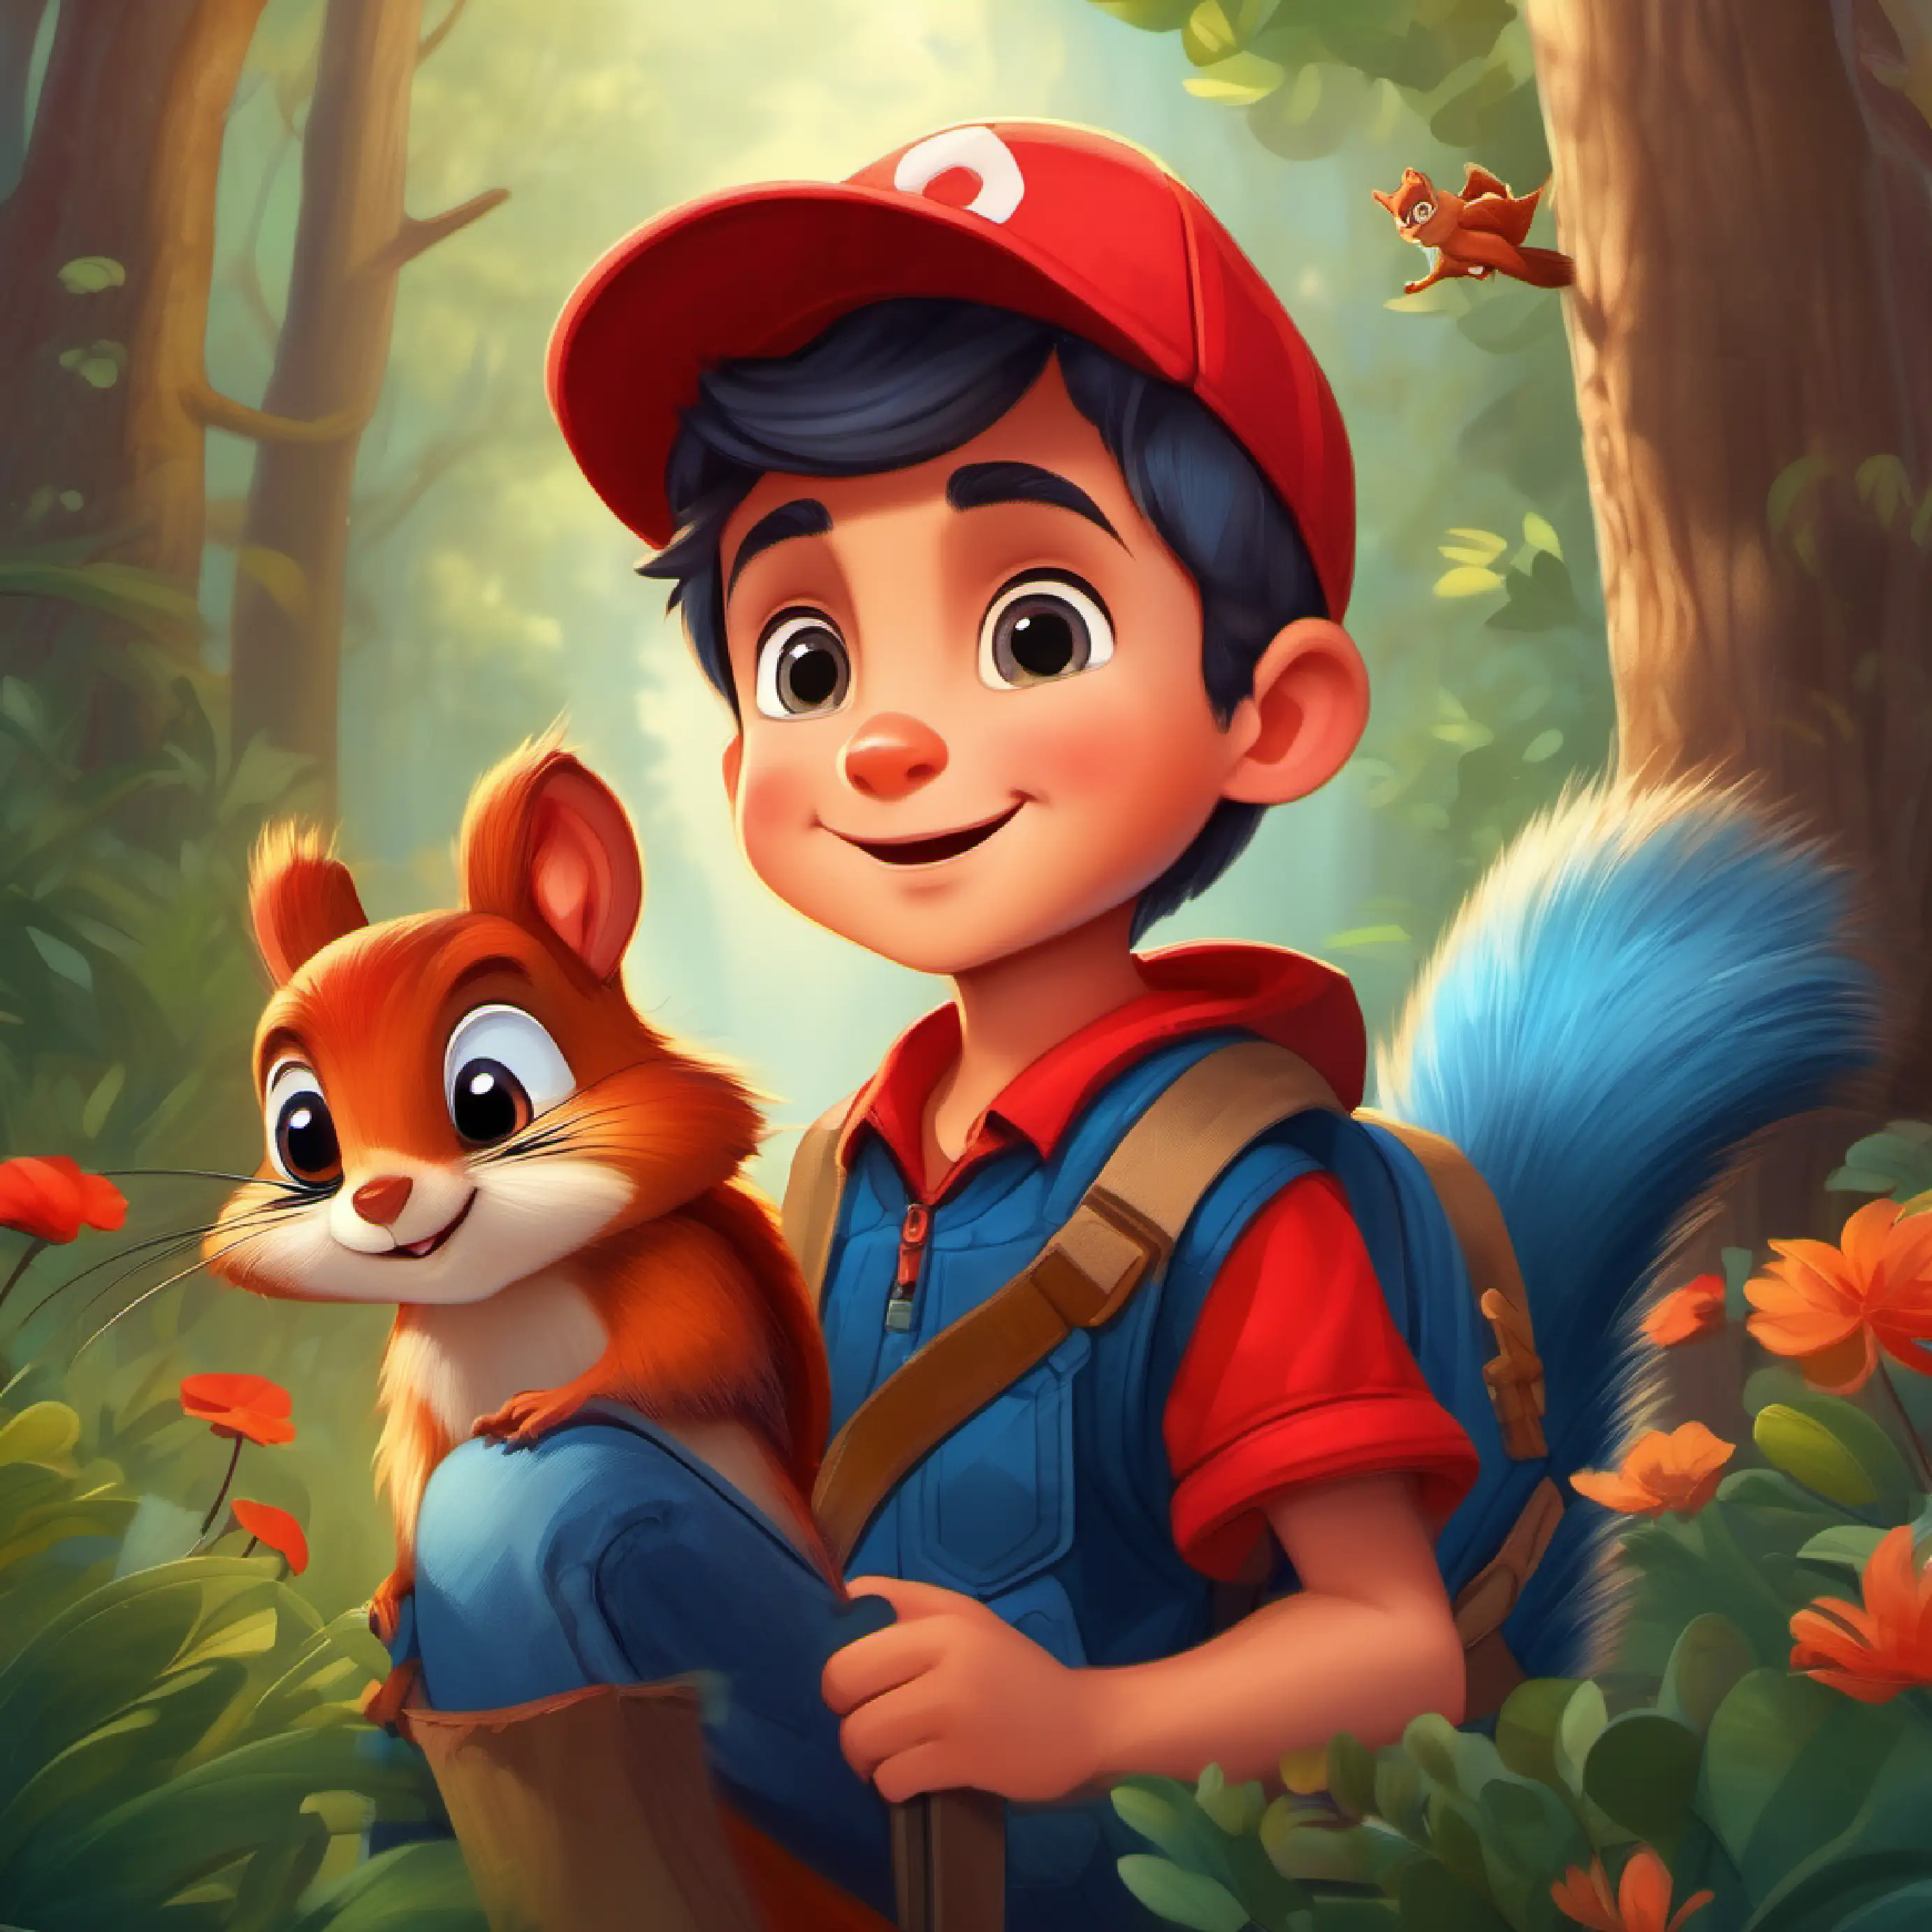 Brave boy, red cap, loves to explore, wears blue jeans meets a friendly squirrel named Friendly squirrel, big eyes, fluffy tail, likes giggling